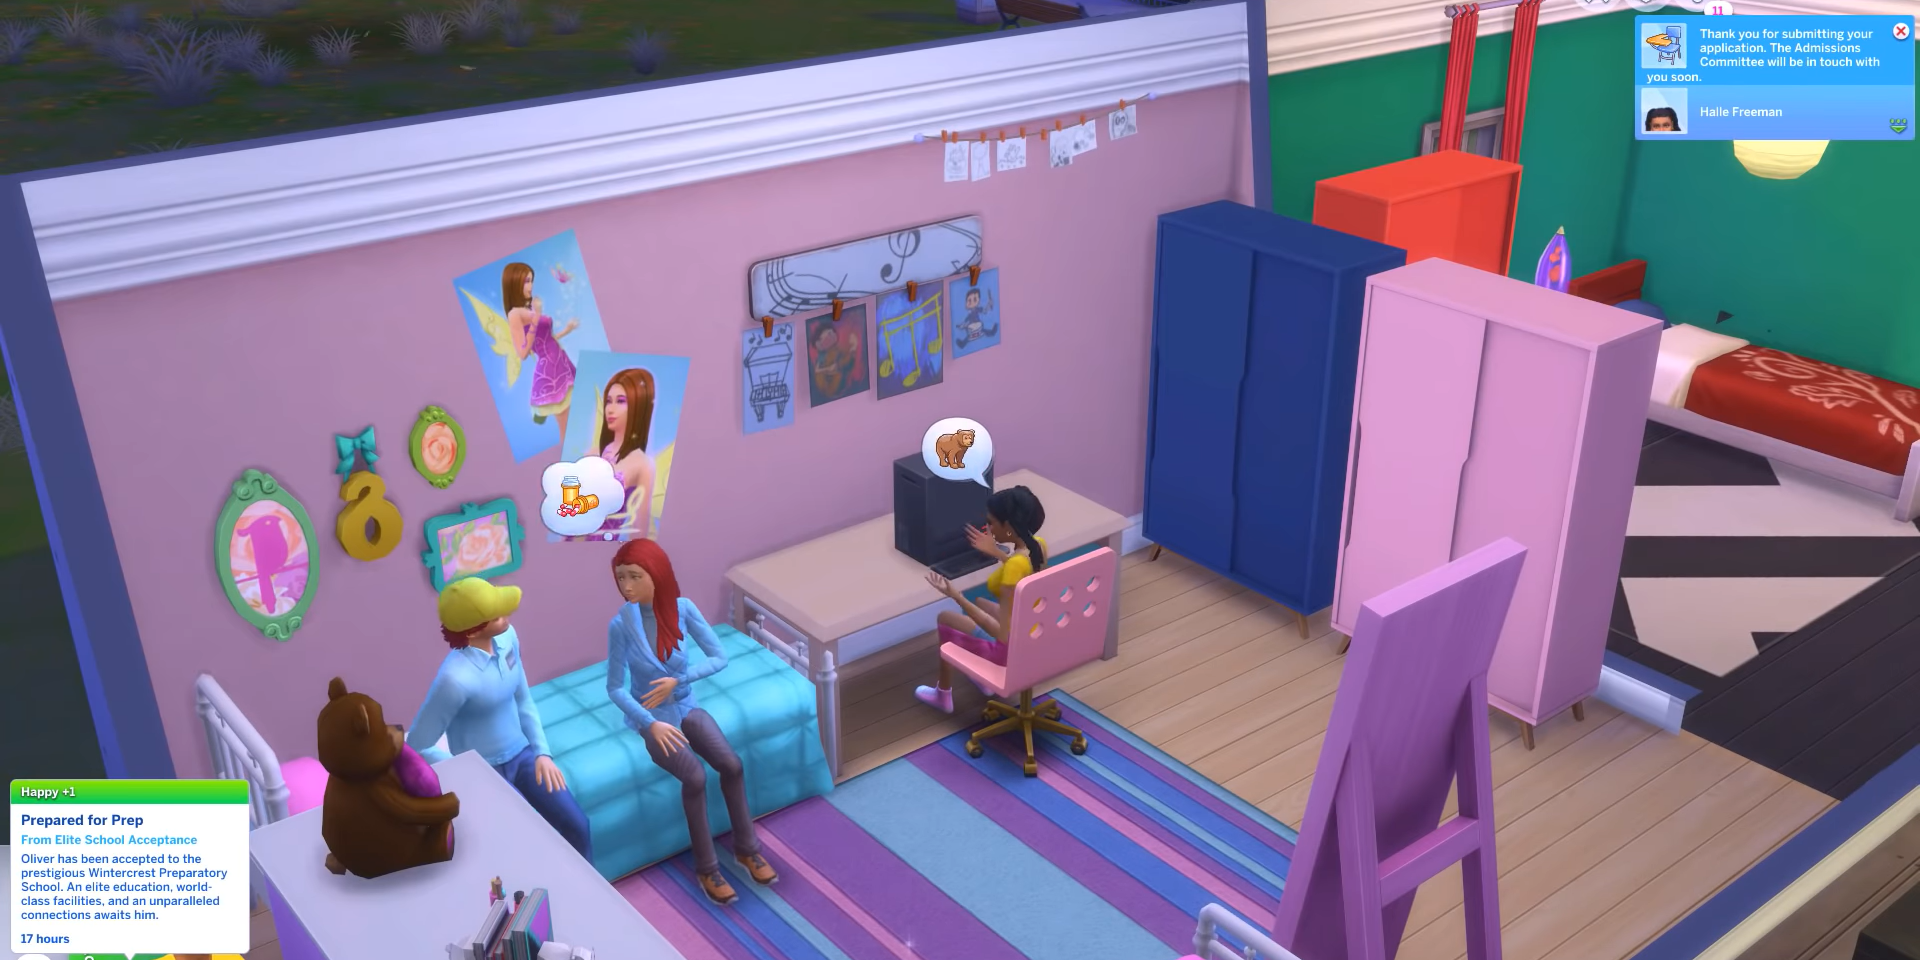 Teen Sims chat in their room, while one Sim uses the computer.